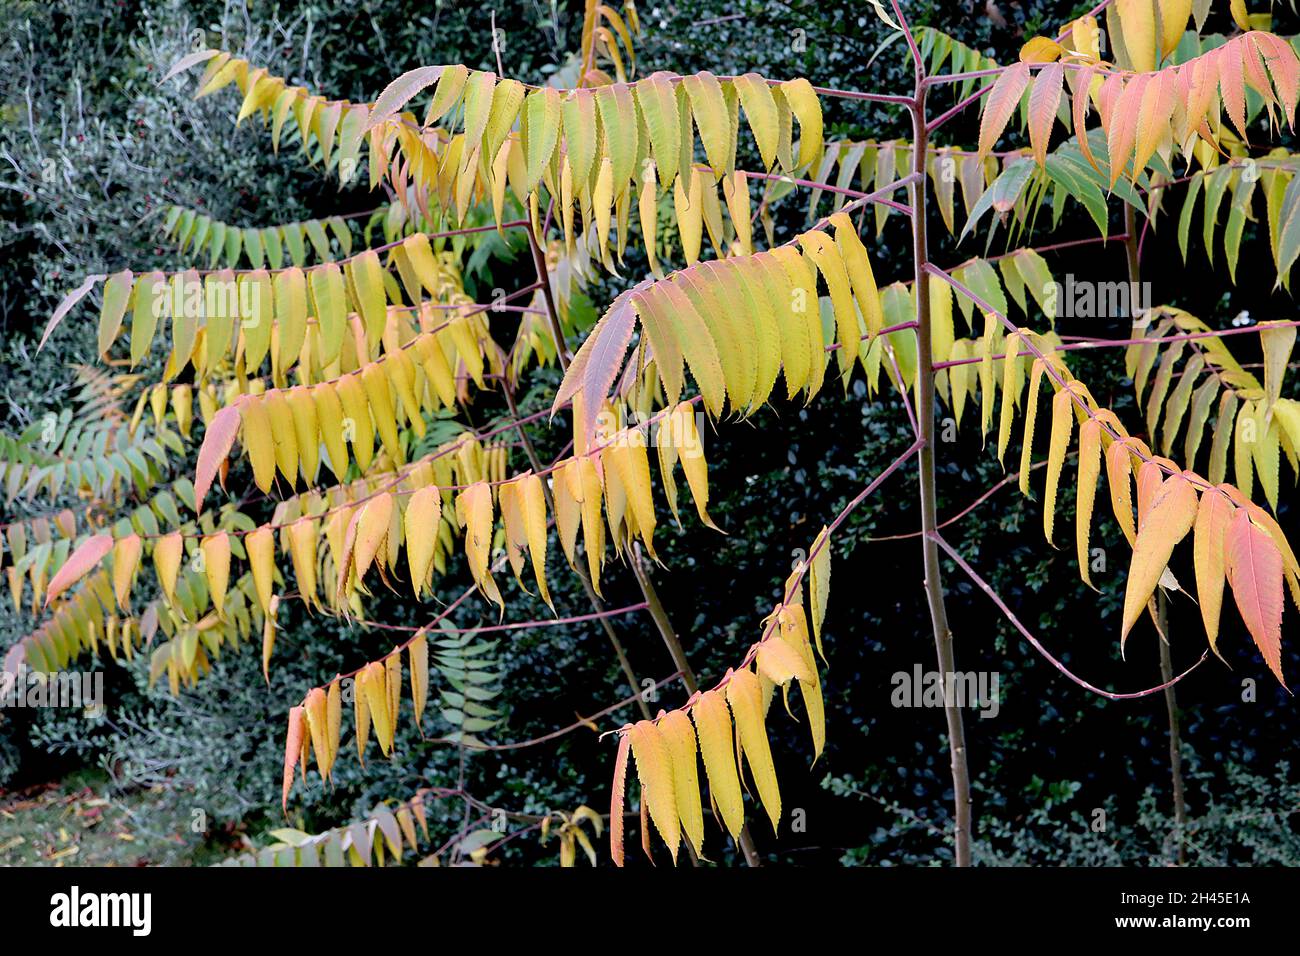 Rhus typhina stag’s horn sumach – large mid green, yellow, orange and red pinnately compound leaves,  October, England, UK Stock Photo